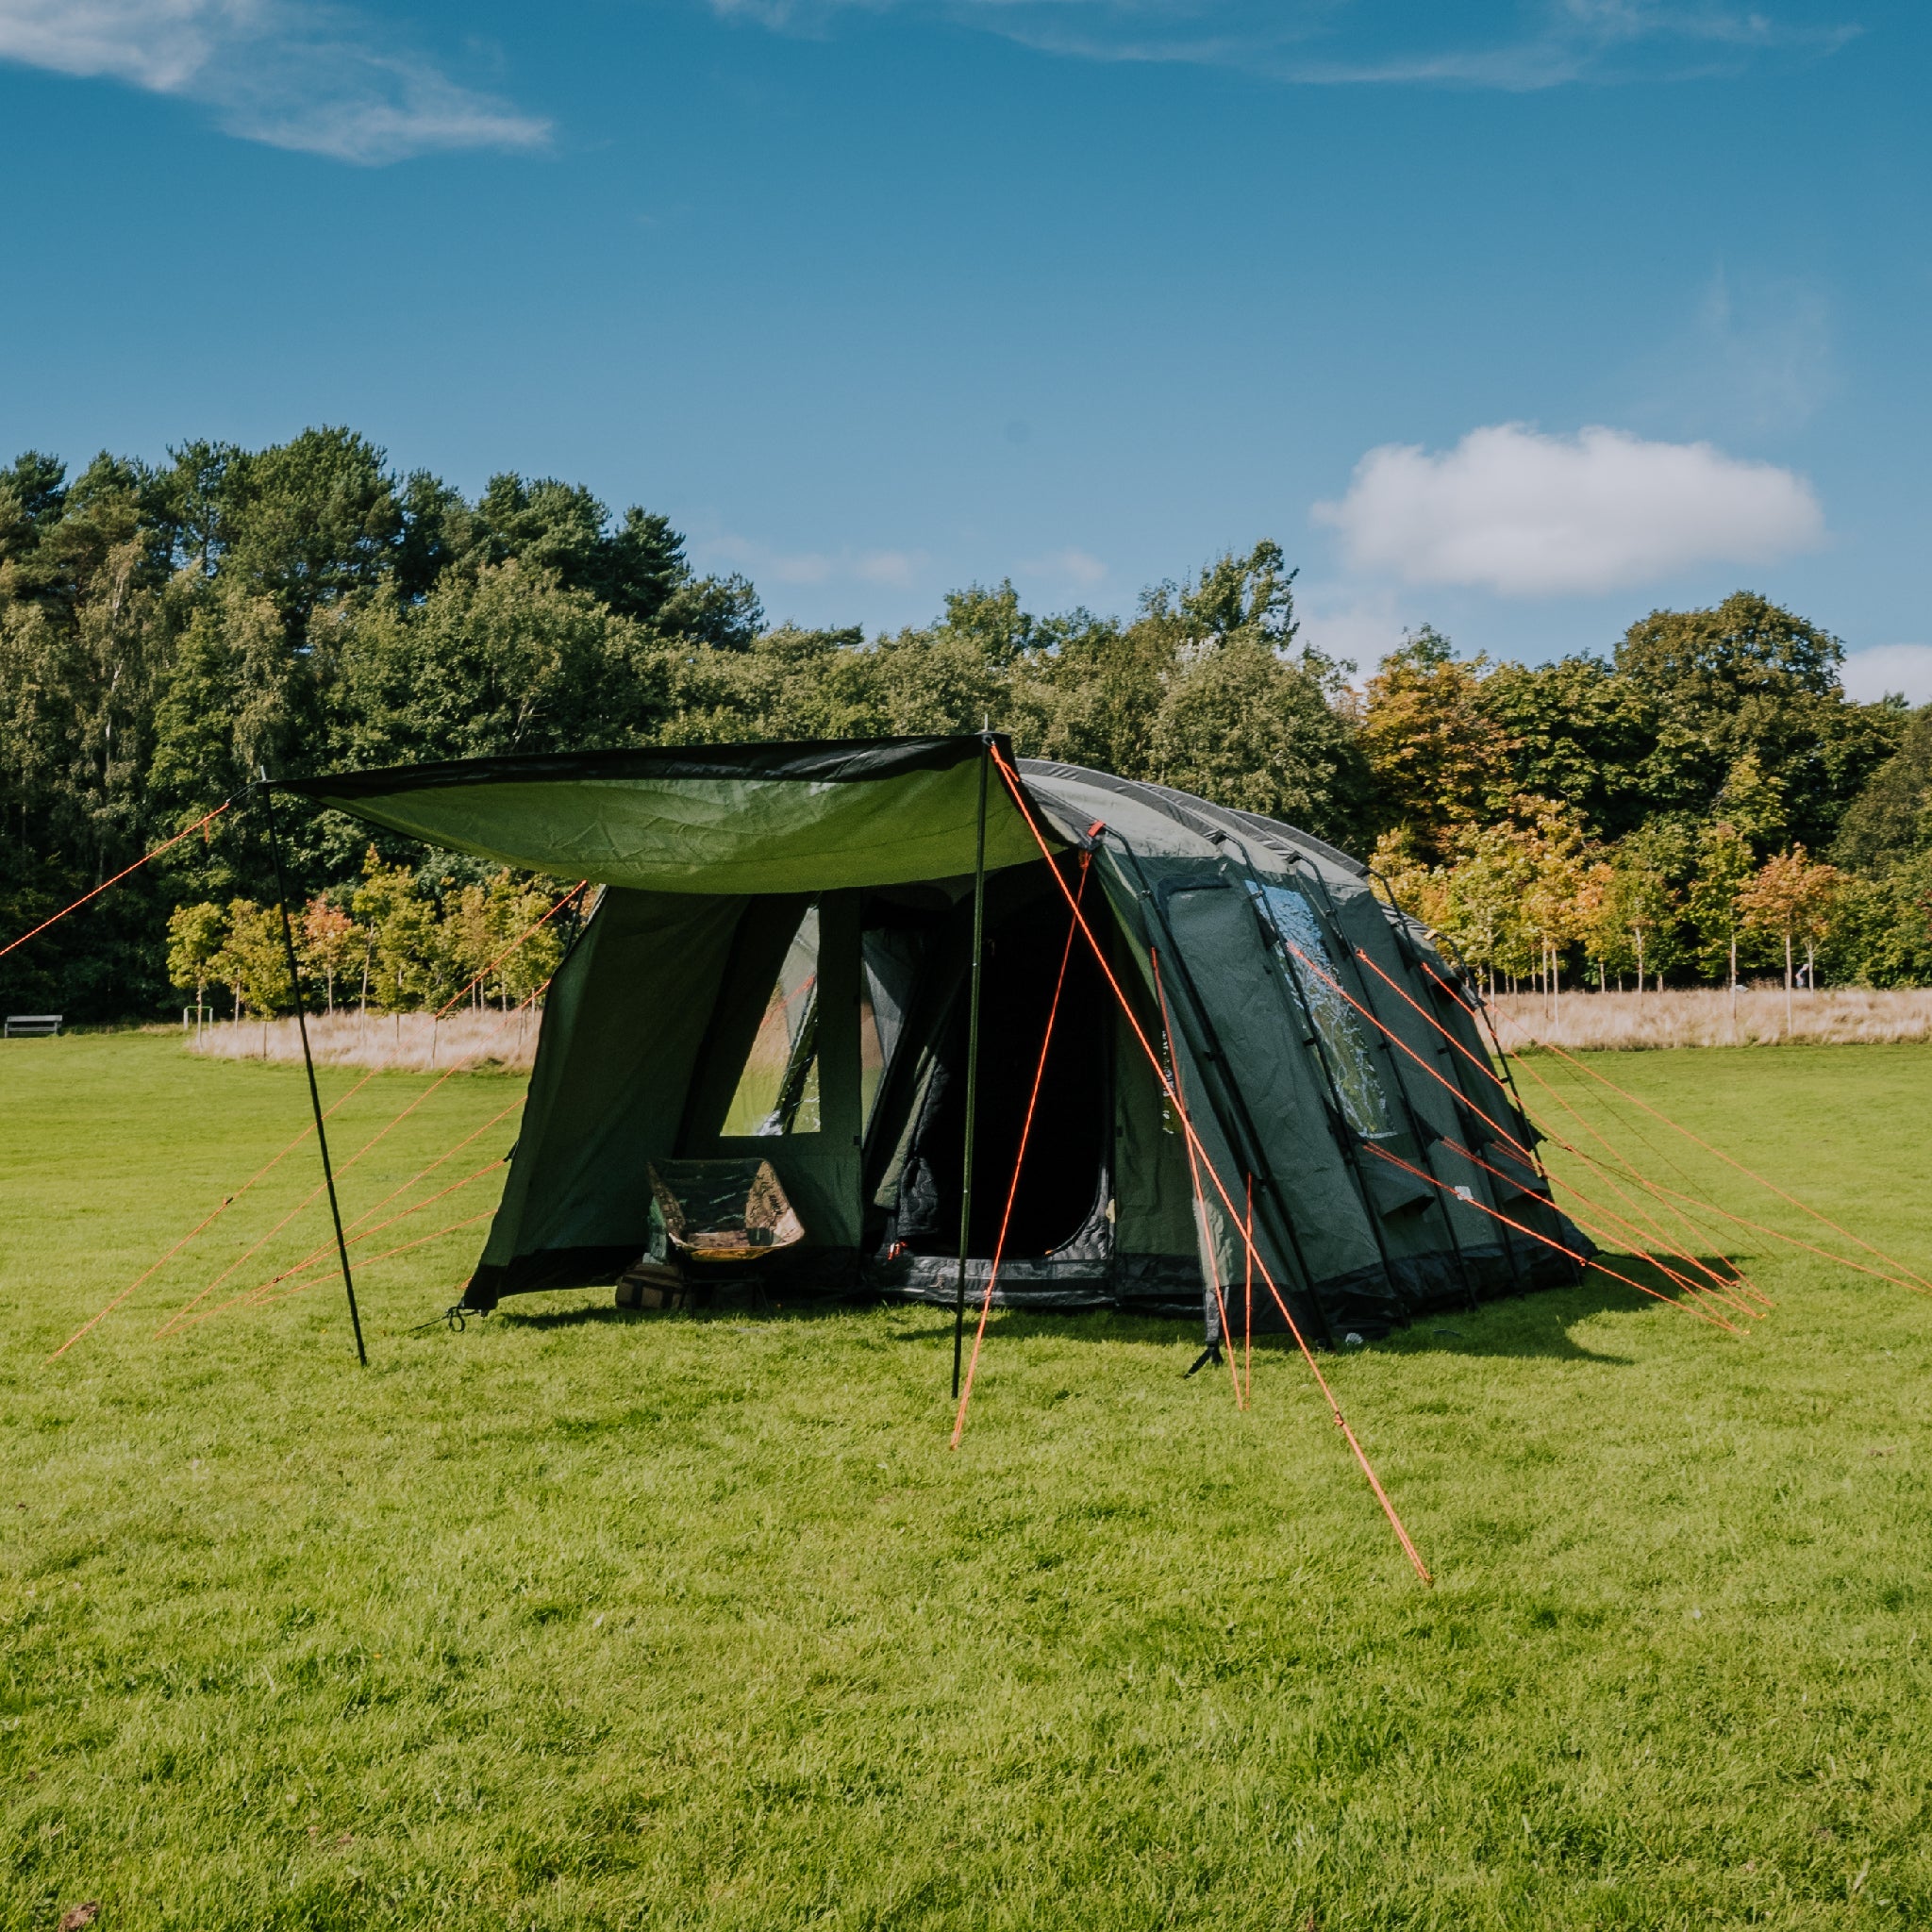 QUAD | 4 PERSON INSULATED TUNNEL TENT - ALL WEATHER COMPATIBLE, WATERPROOF, SPACIOUS SHELTER WITH ENHANCED COMFORT AND DURABILITY